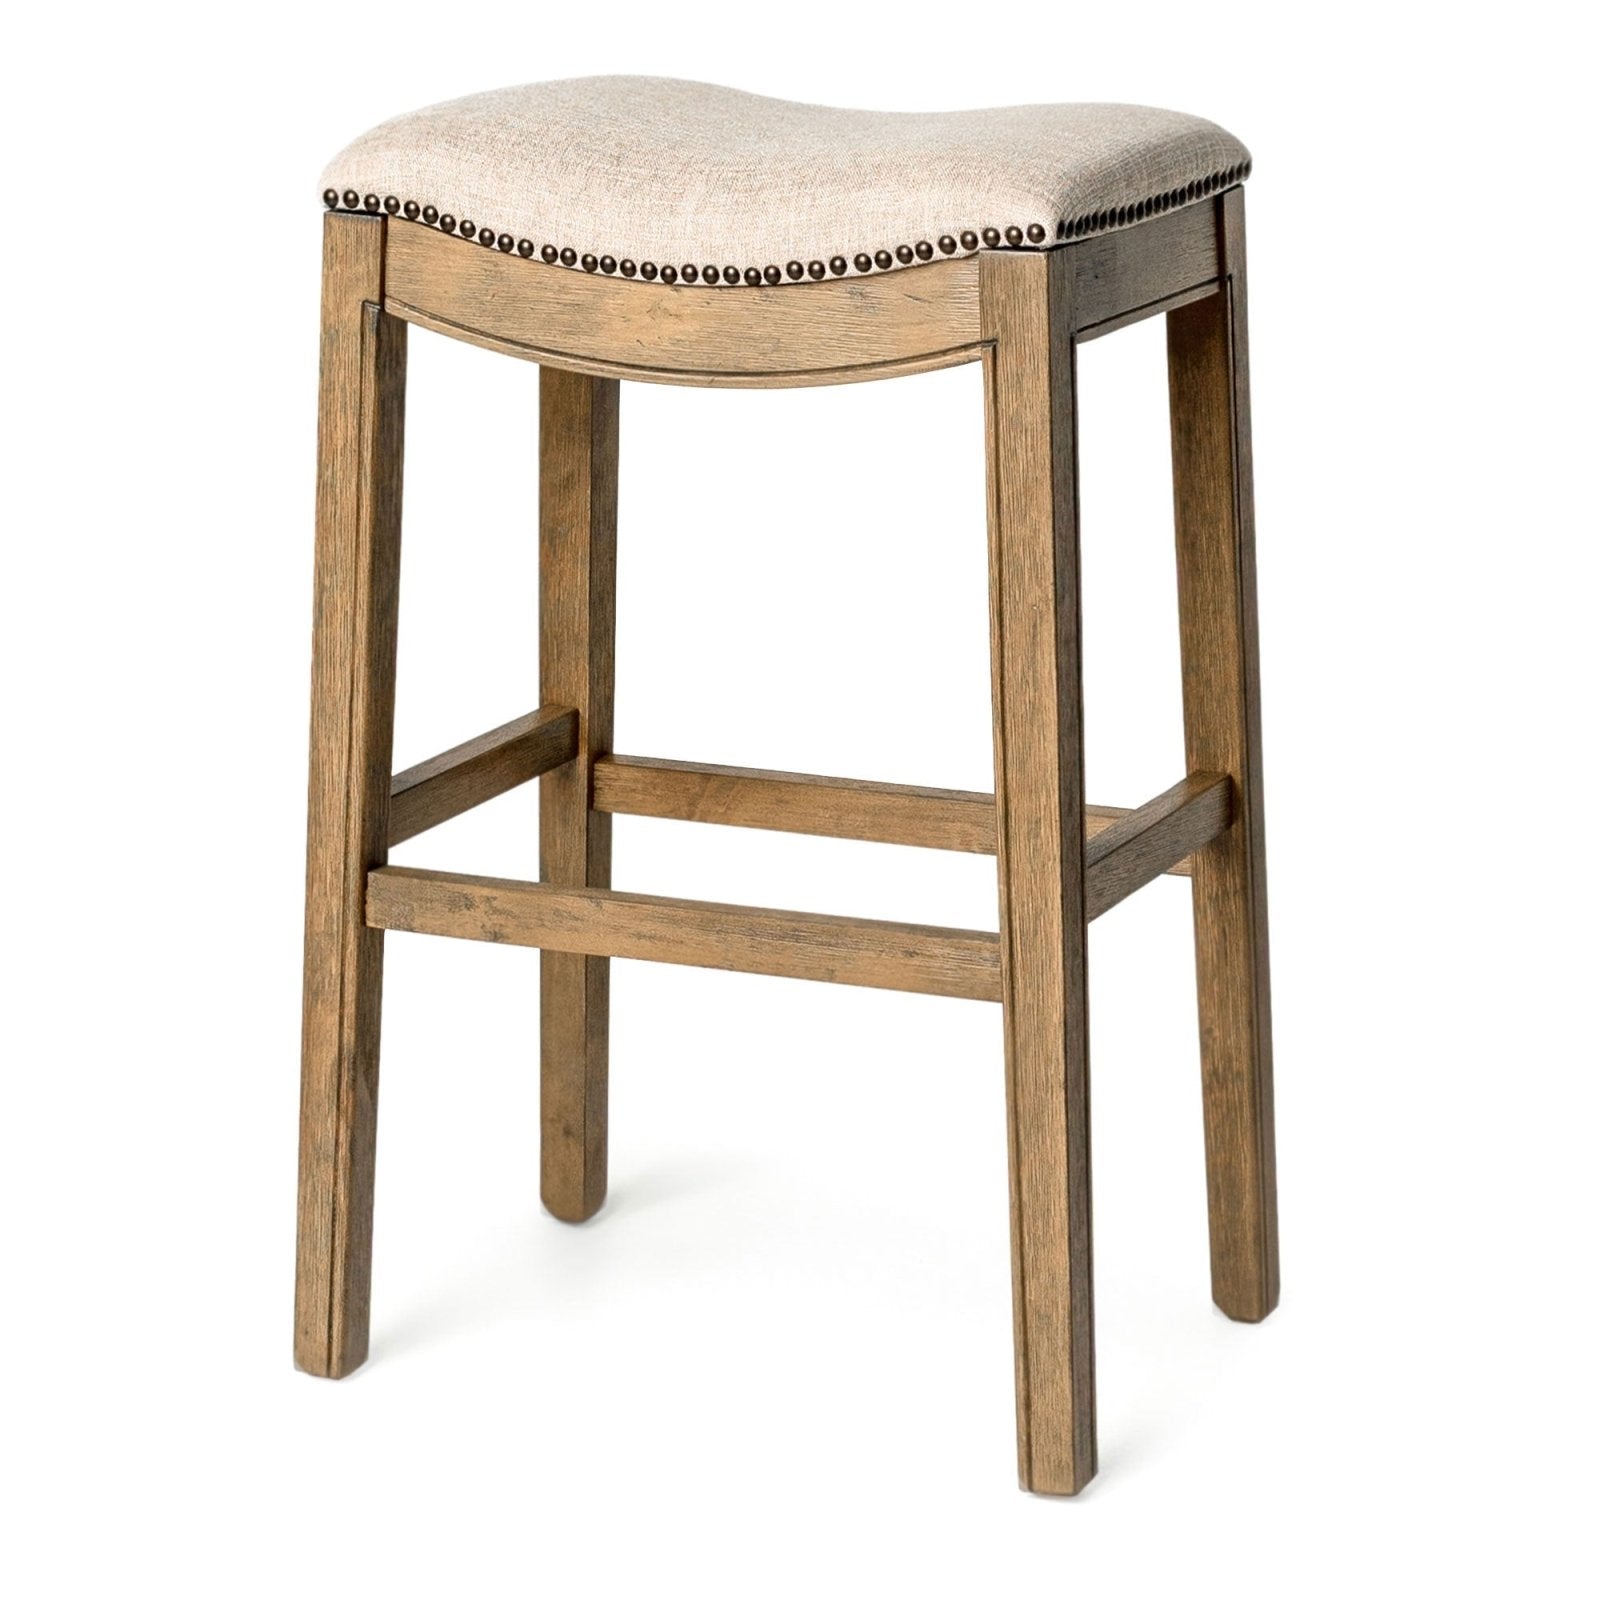 Adrien Saddle Bar Stool in Natural Wood Finish with Wheat Fabric Upholstery in Stools by Maven Lane